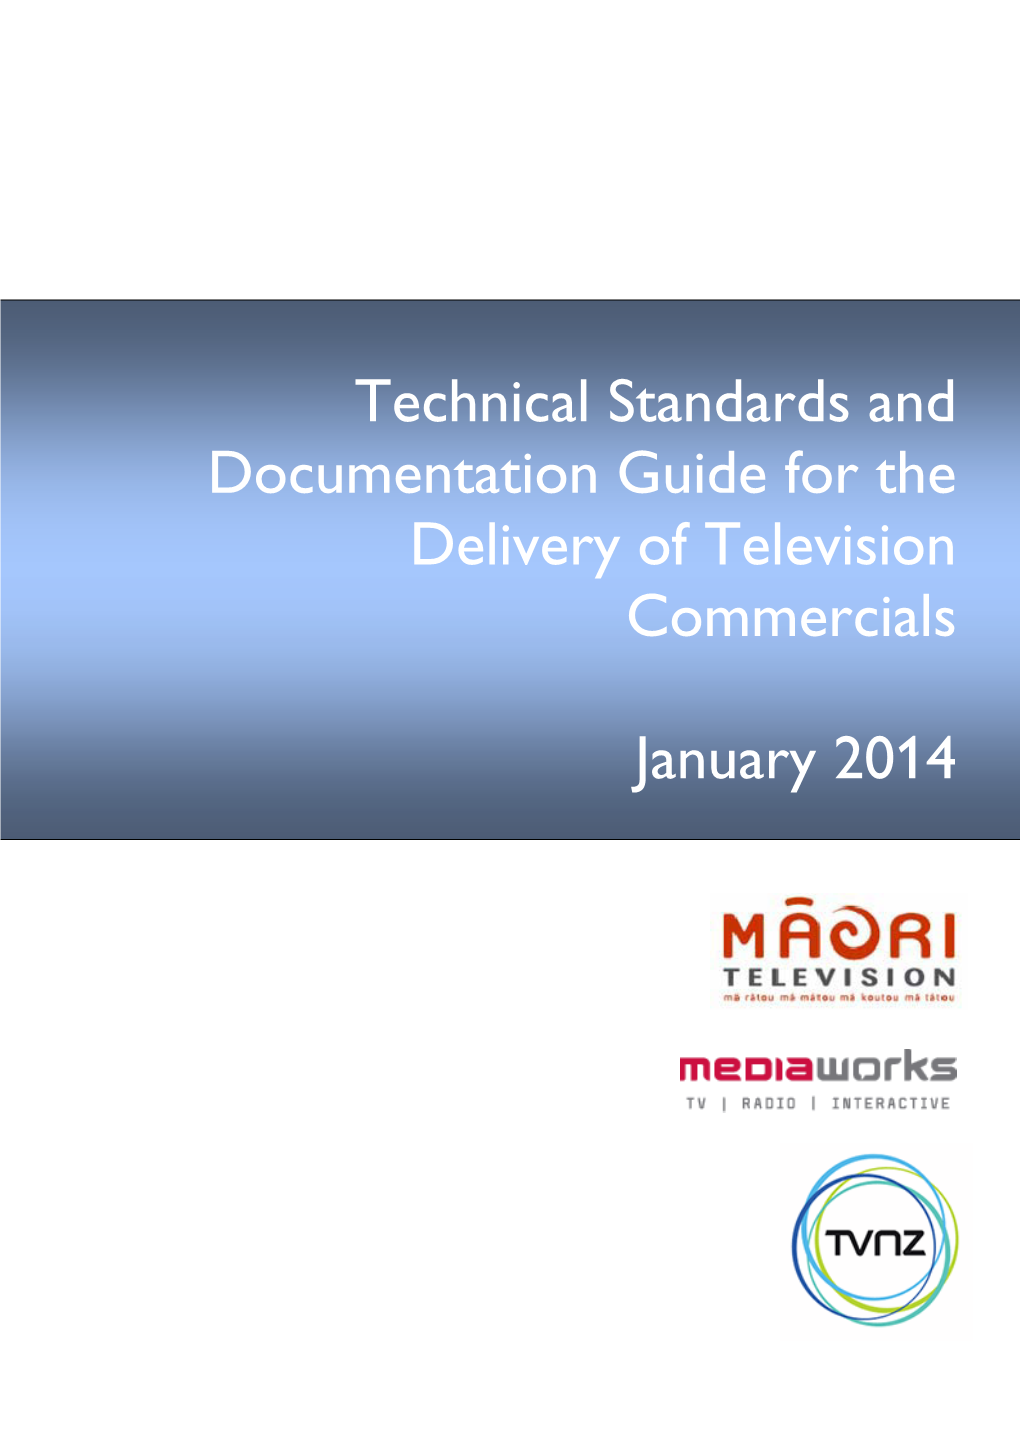 Technical Standards and Documentation Guide for the Delivery of Television Commercials